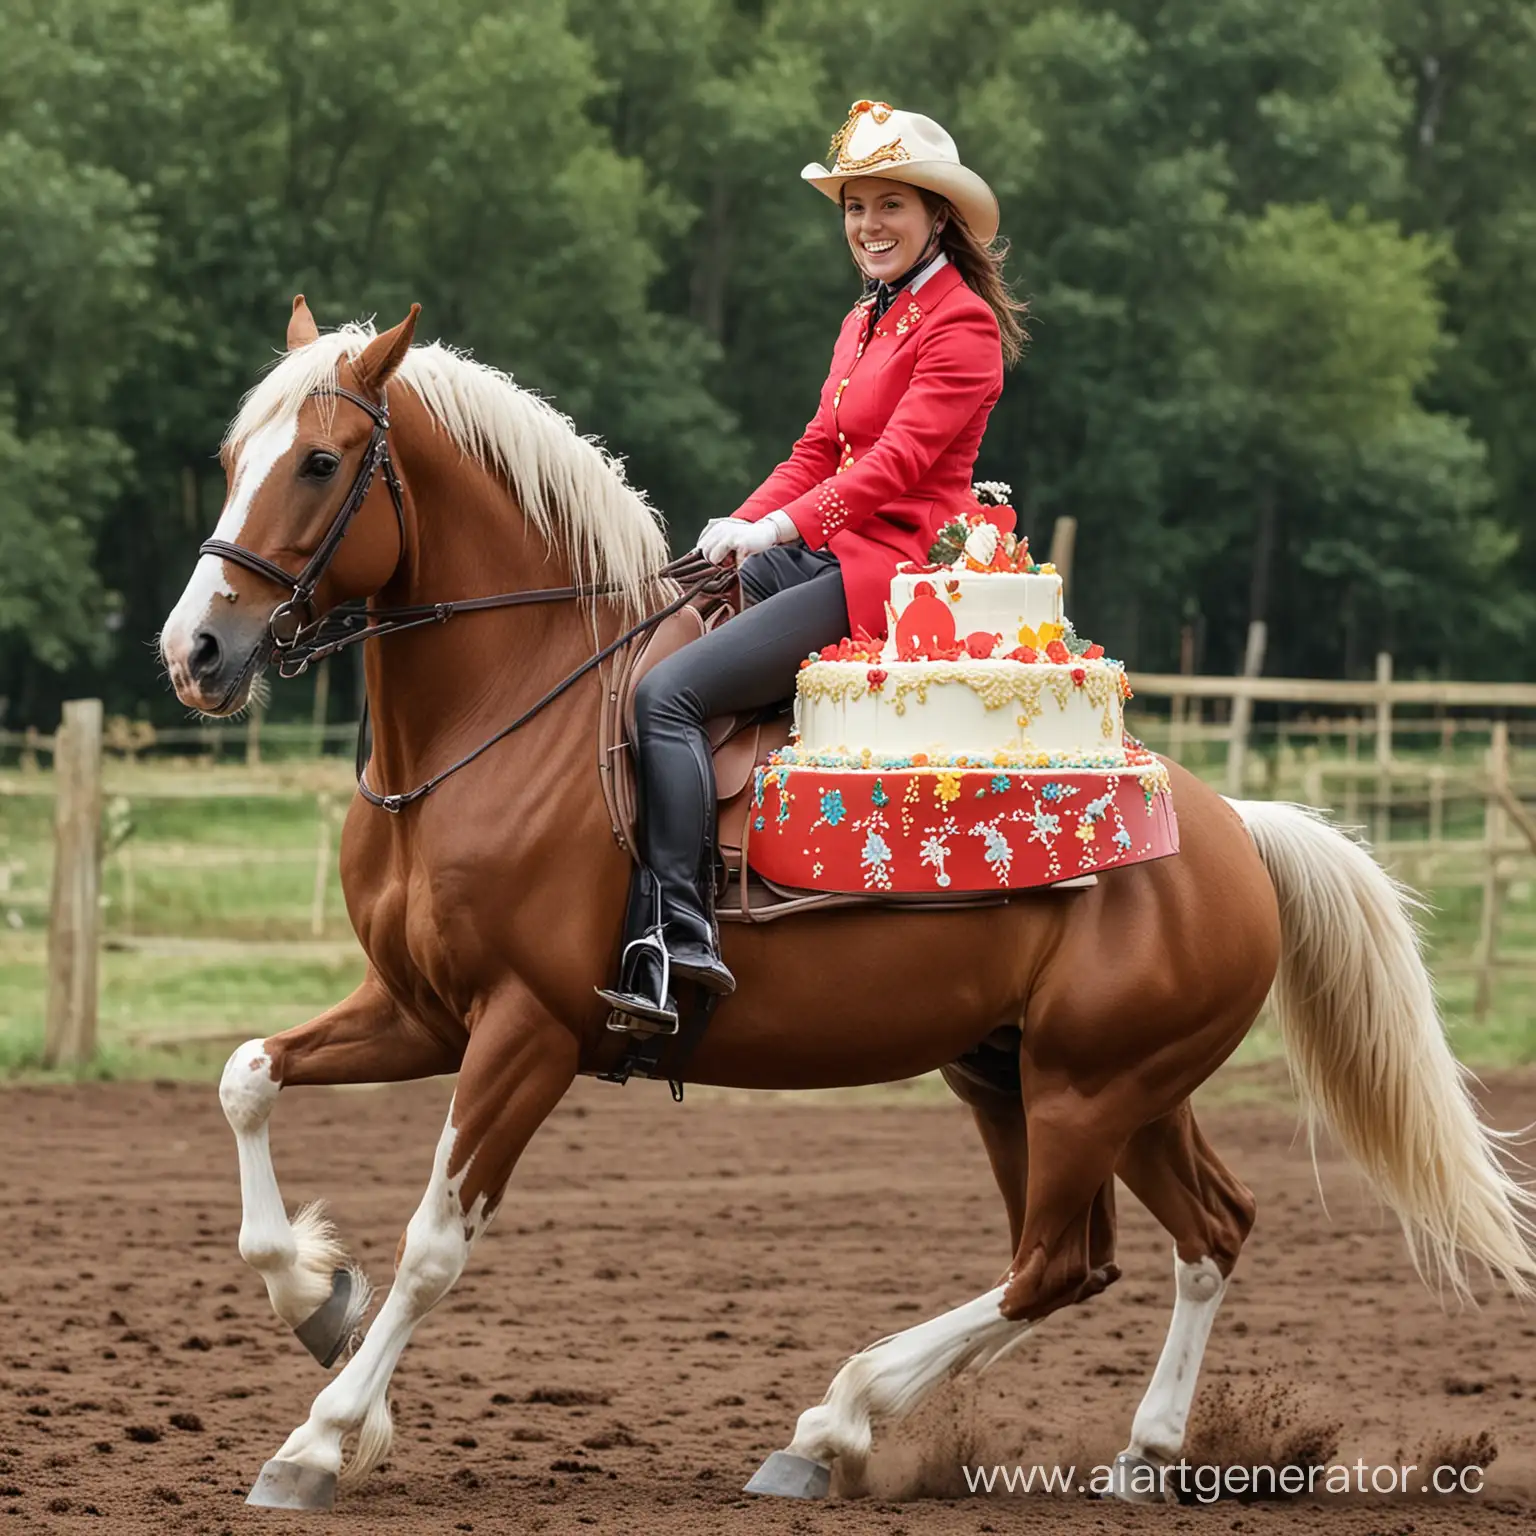 Equestrian-Cake-Delight-Majestic-Horse-Galloping-with-a-Lavish-Cake